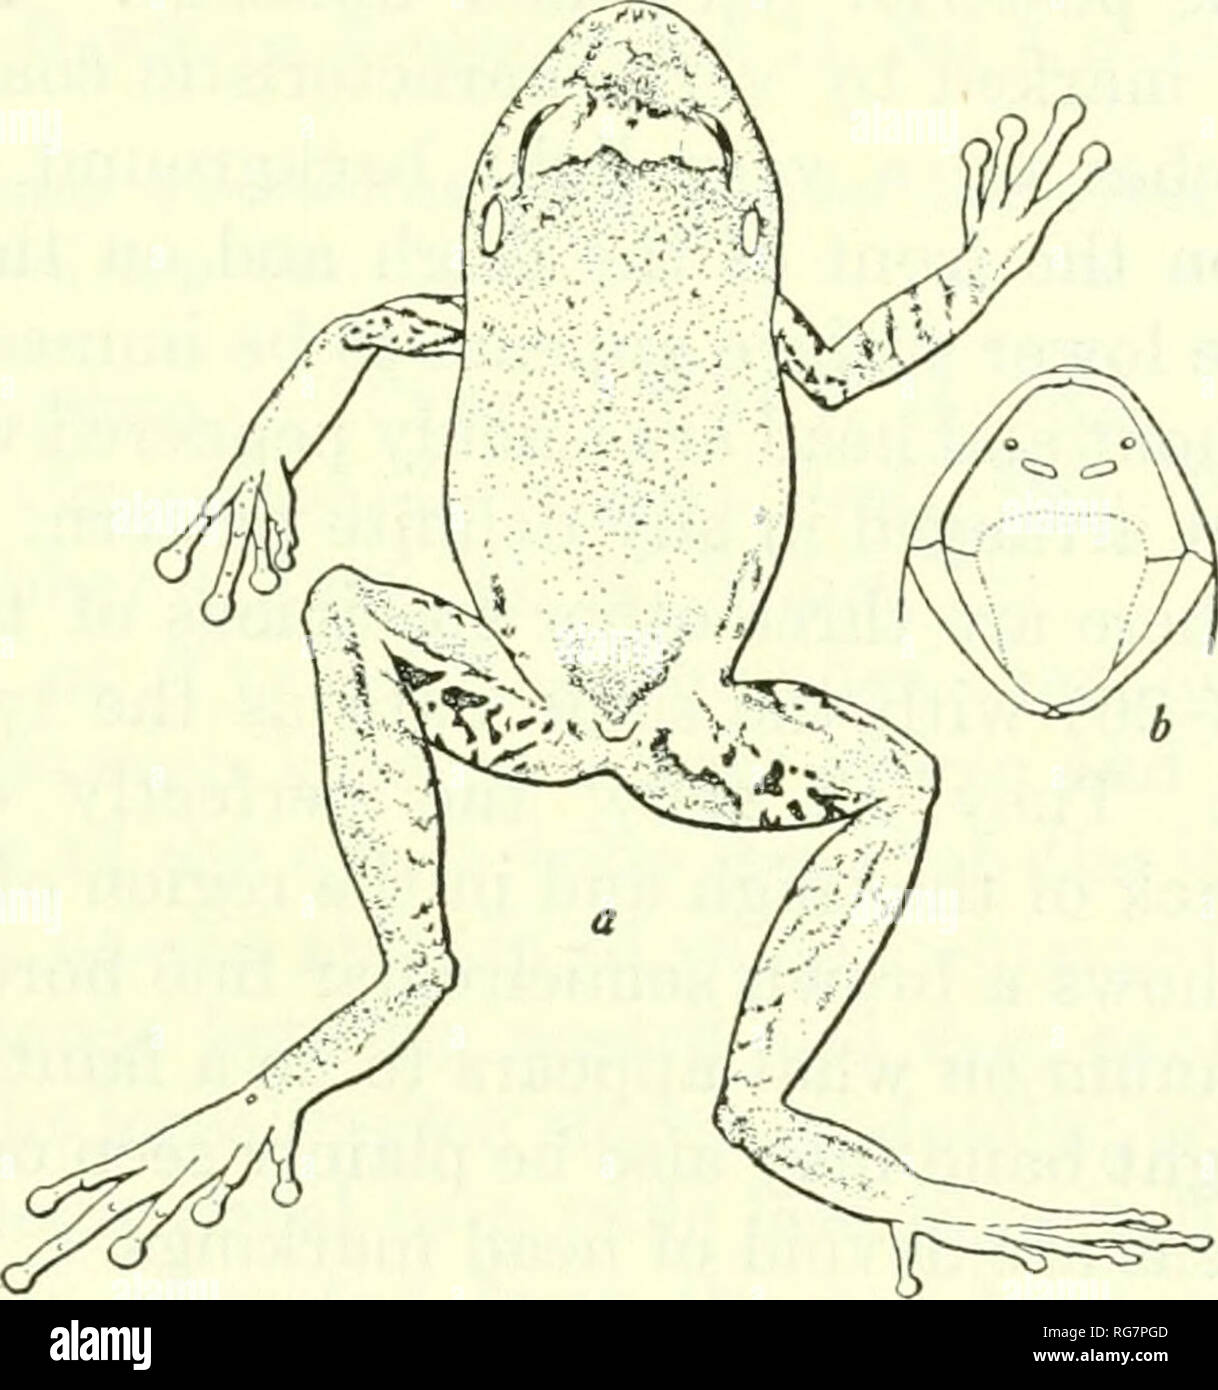 . Bulletin - United States National Museum. Science. THE HERPETOLOGY OF HISPANIOLA 75 Original description.—&quot;Type.—U.S.N.M. No. 72617, an adult from Fonds-des-Negres, Haiti, taken by Dr. A. Wetmore on April 5, 1927, from the nest of a palm-chat, Dulus dominions, together with two tree-toads, Hyla dominicensis. &quot;Description of the type.—Tongue broad, apparently not emarginate behind; vomerine teeth in two long oblique groups some distance behind the choanae, their outer ends not extending beyond the inner borders of the choanae; head moderate, without ridges; no apparent subgular pouc Stock Photo